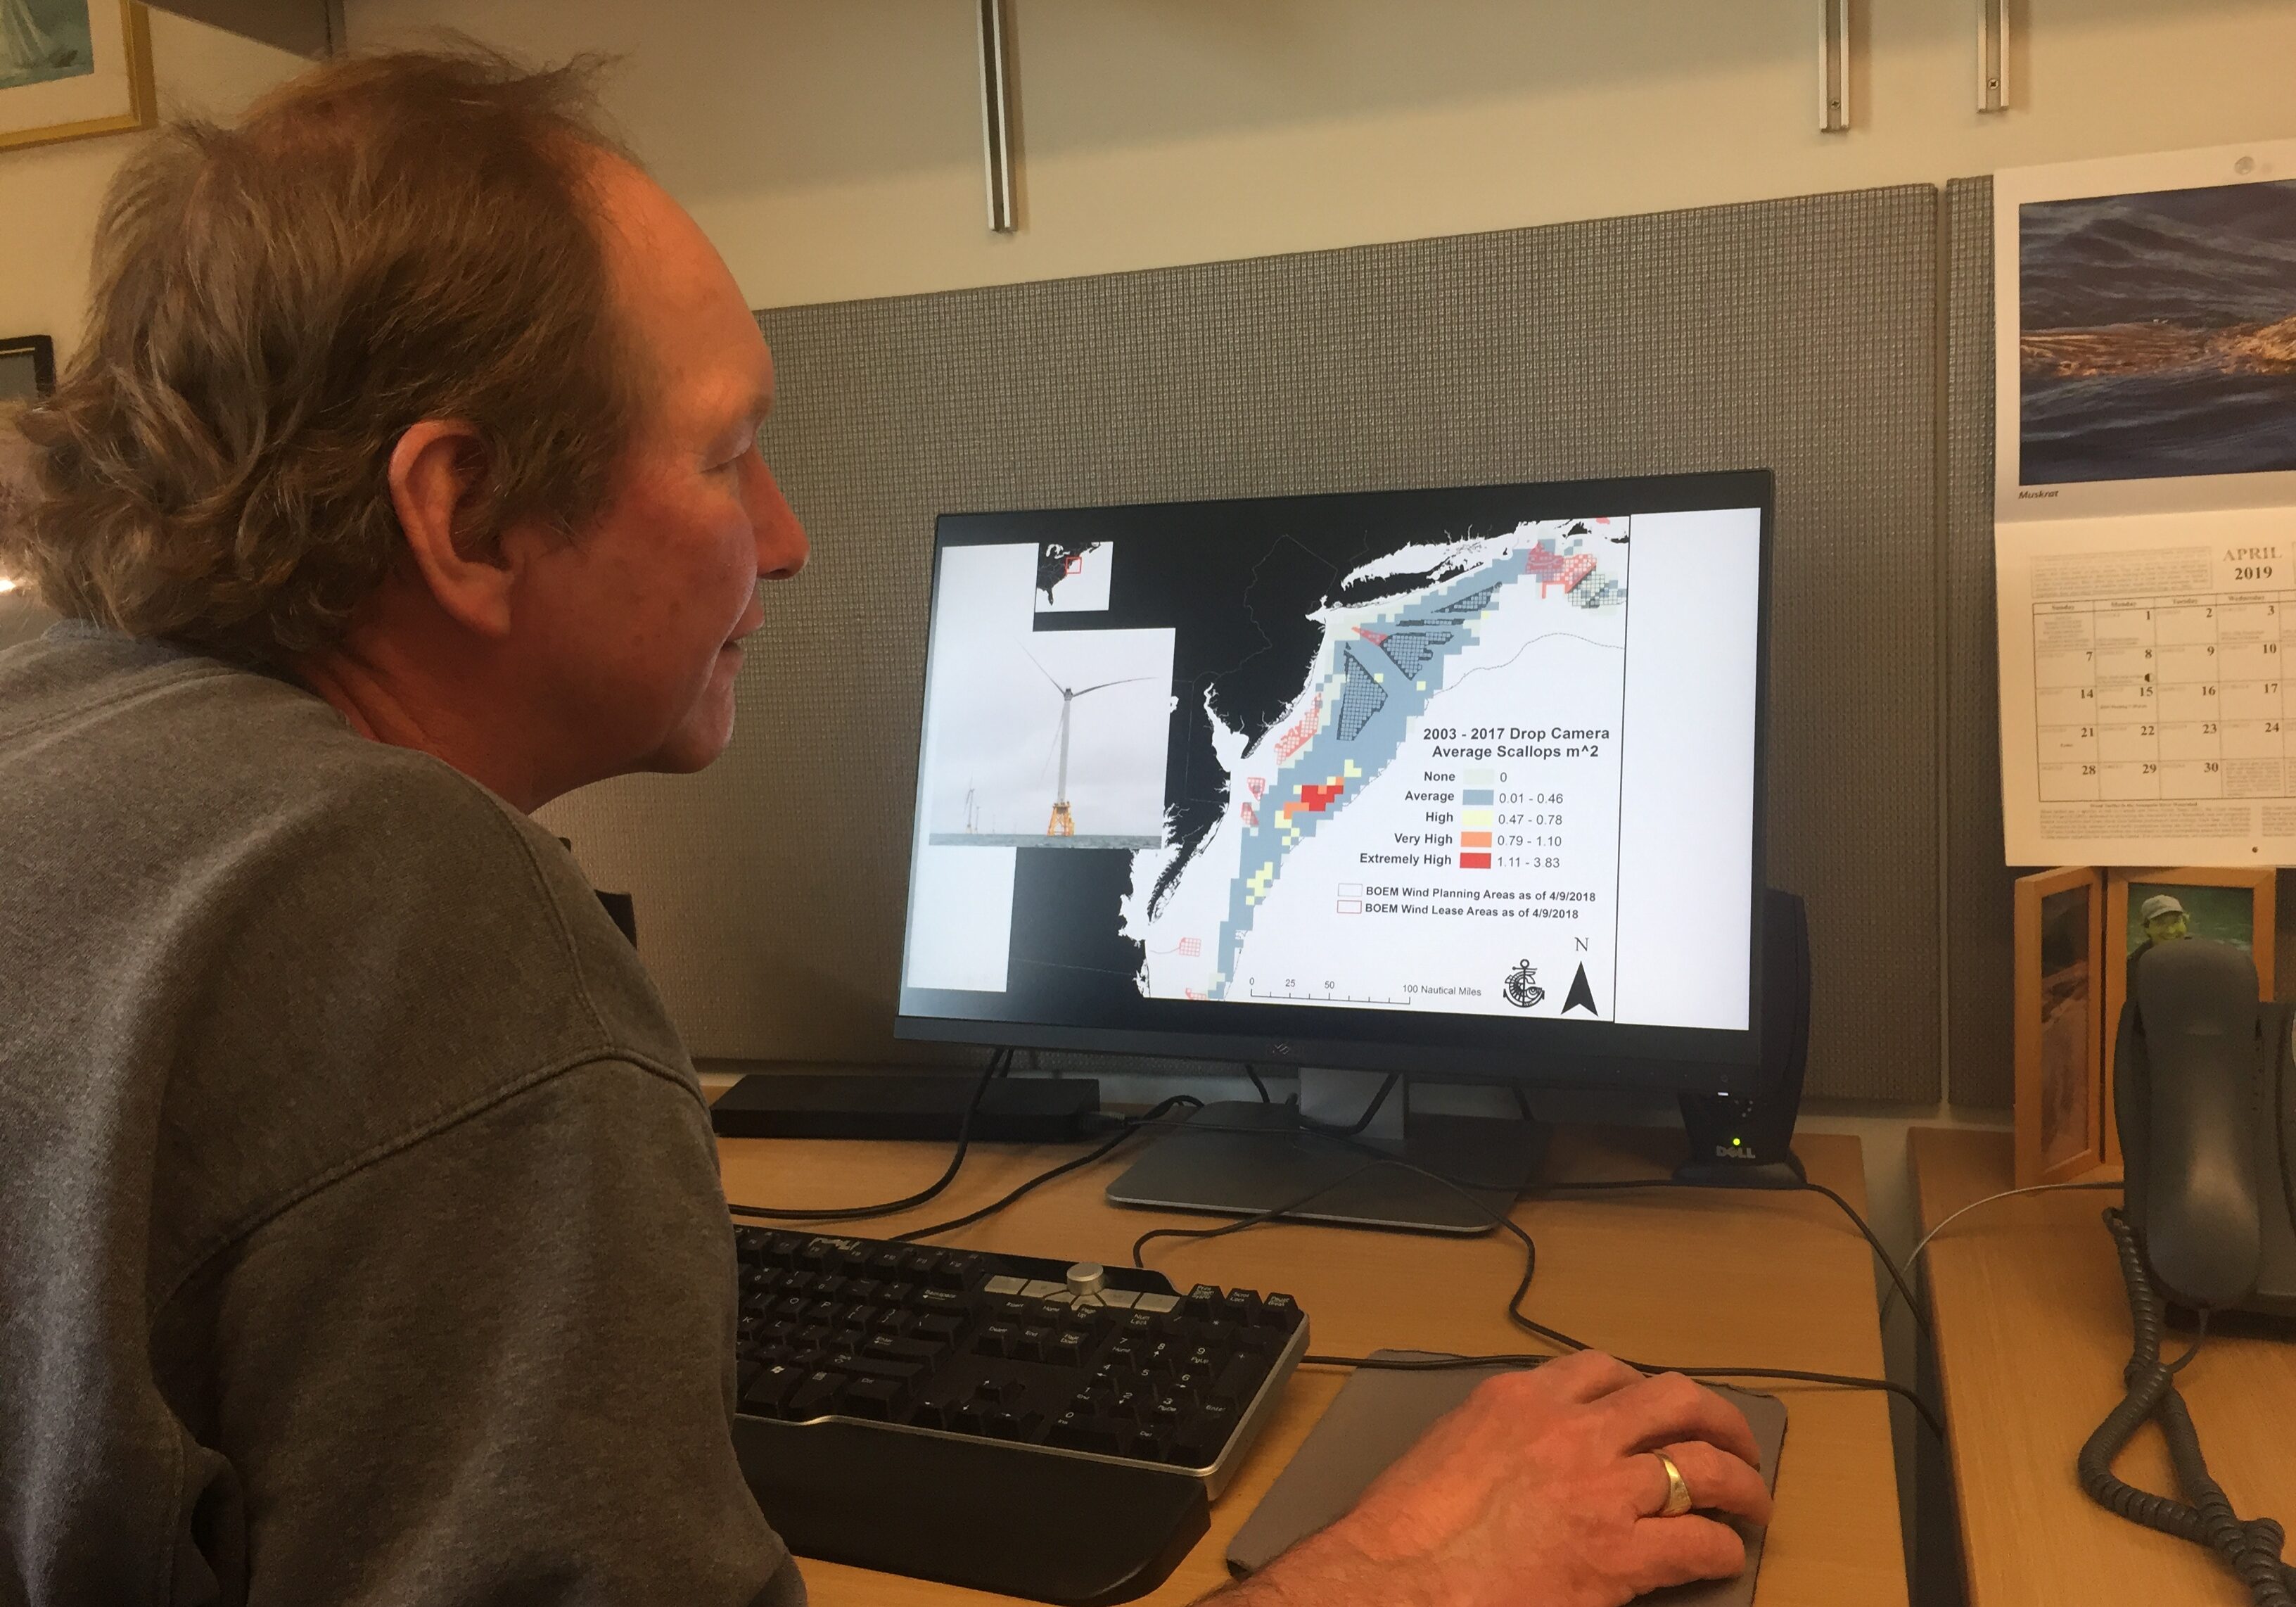 Dr. Kevin Stokesbury shows a map of scallop surveys and proposed offshore wind farms in the Mid-Atlantic. Photo by Nadine Sebai for The Public's Radio